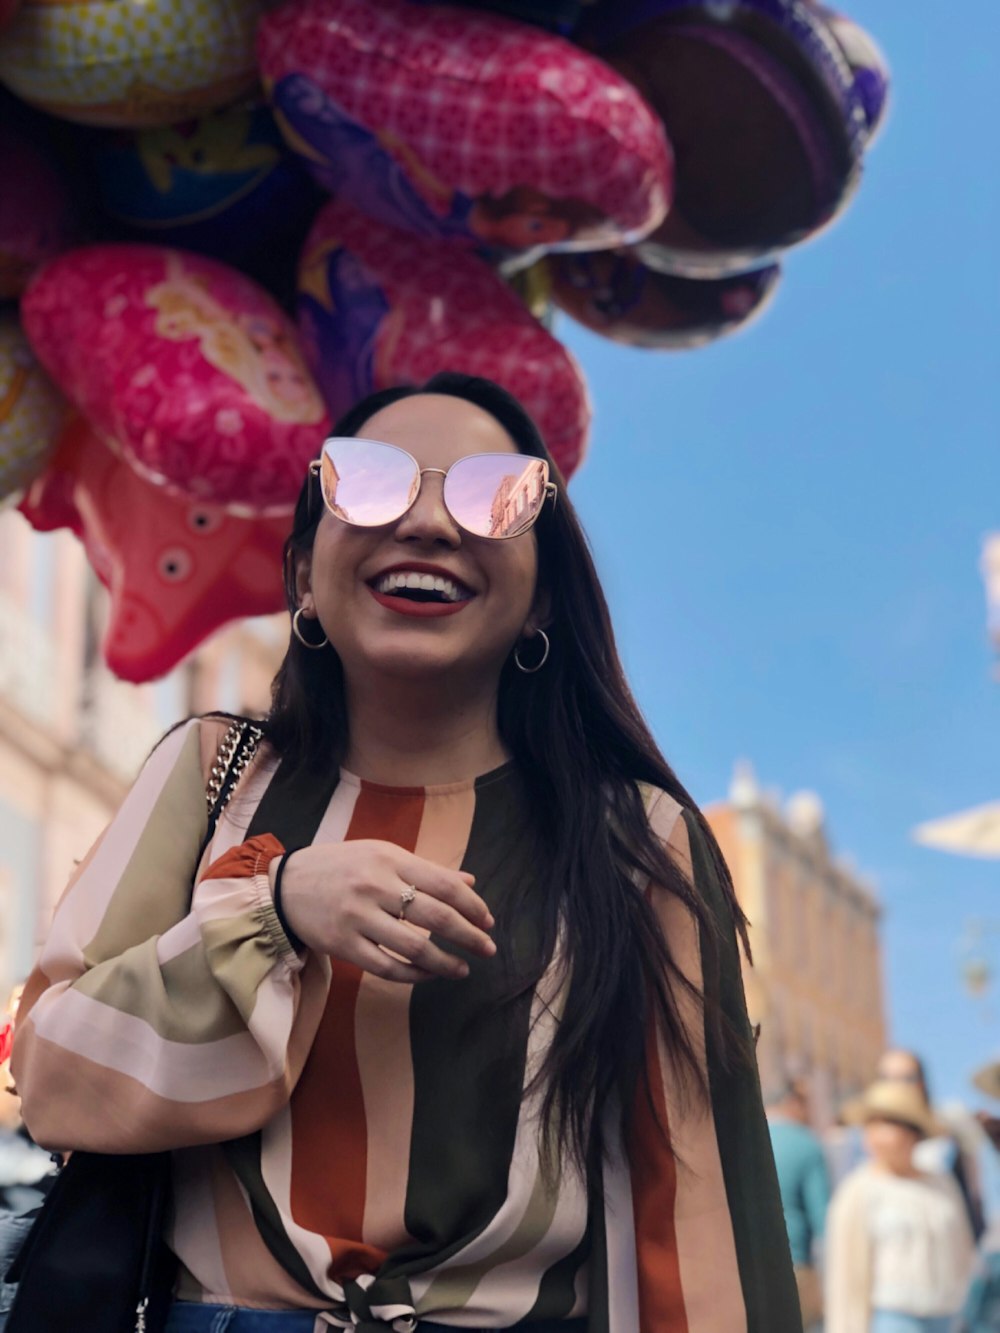 smiling woman wearing sunglasses standing beside balloons